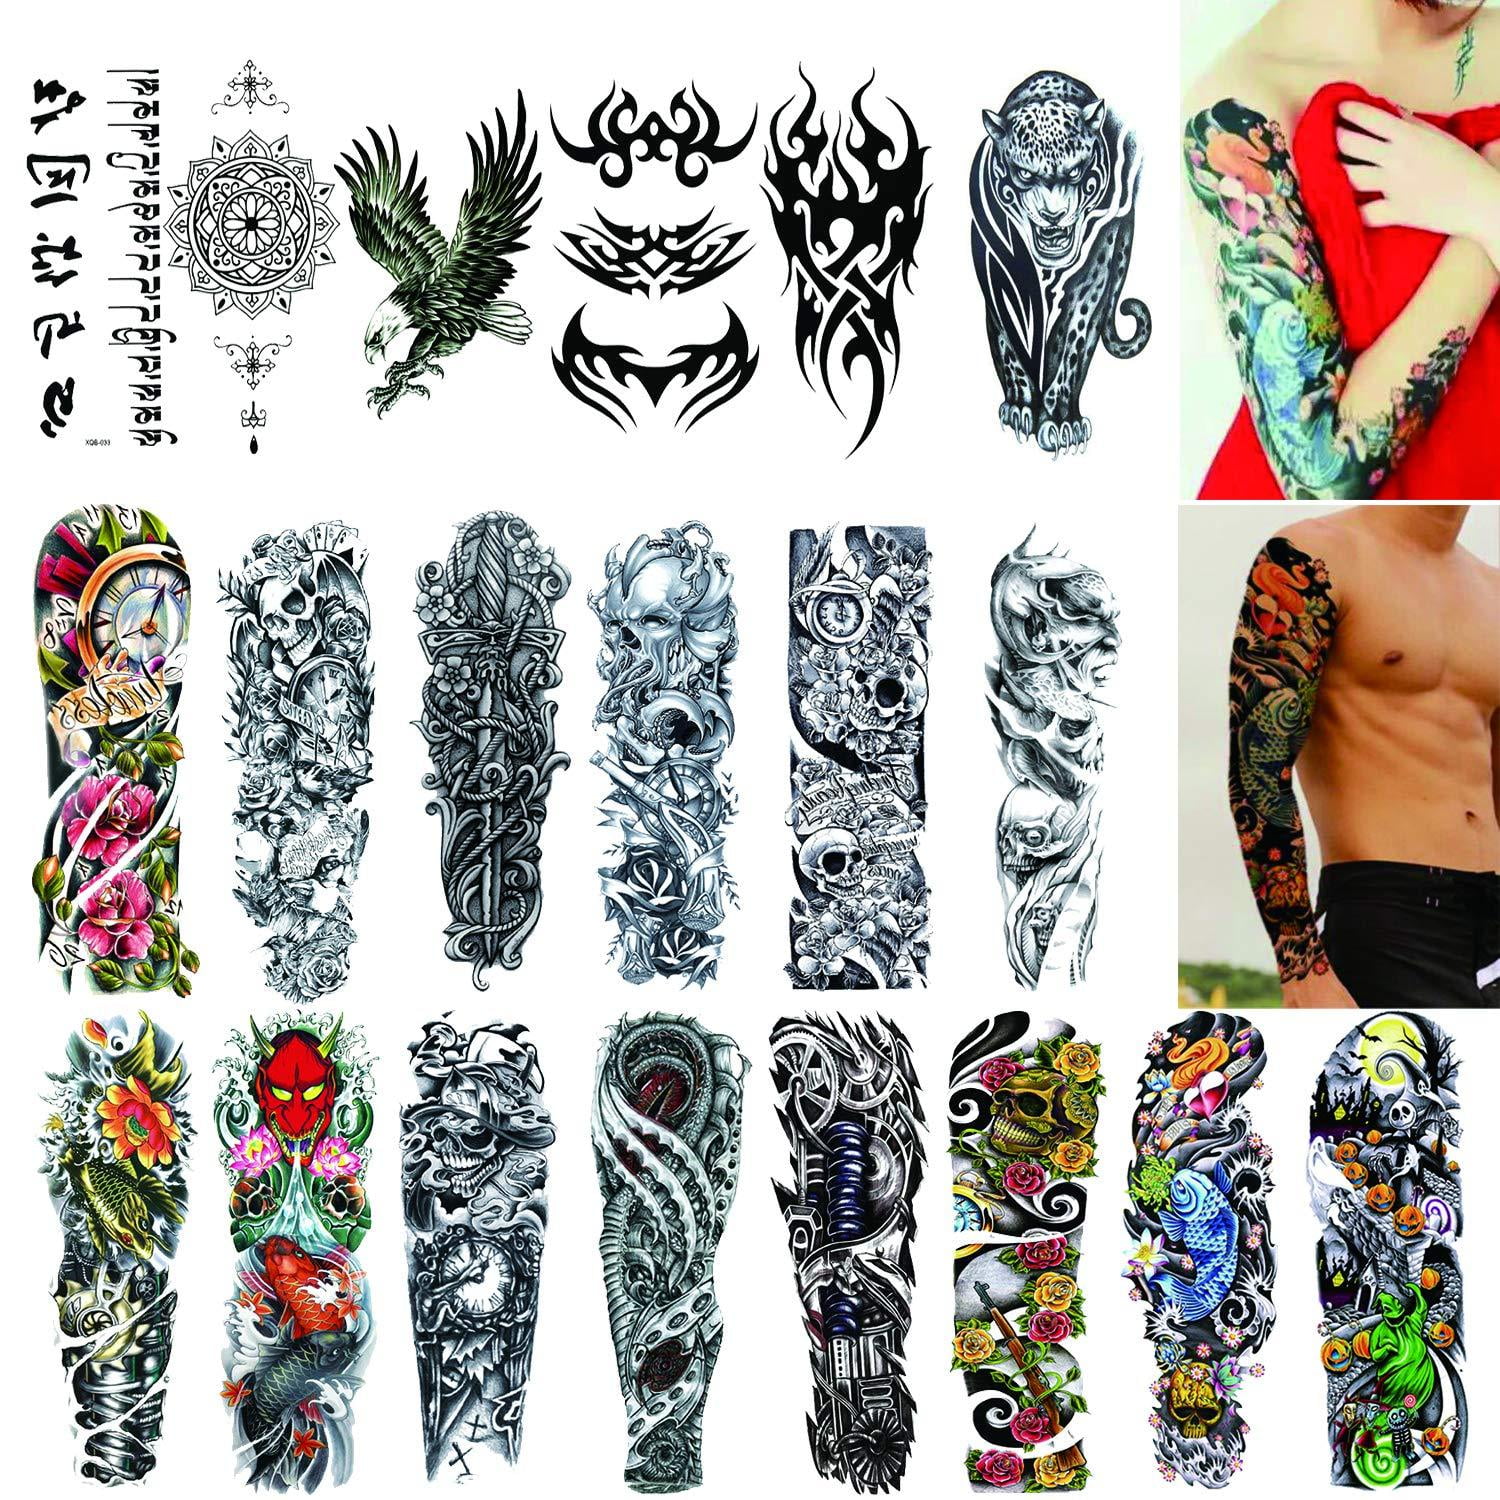 Full Arm Temporary Tattoos 20 Sheets Tattoo Sleeves for Men and Women